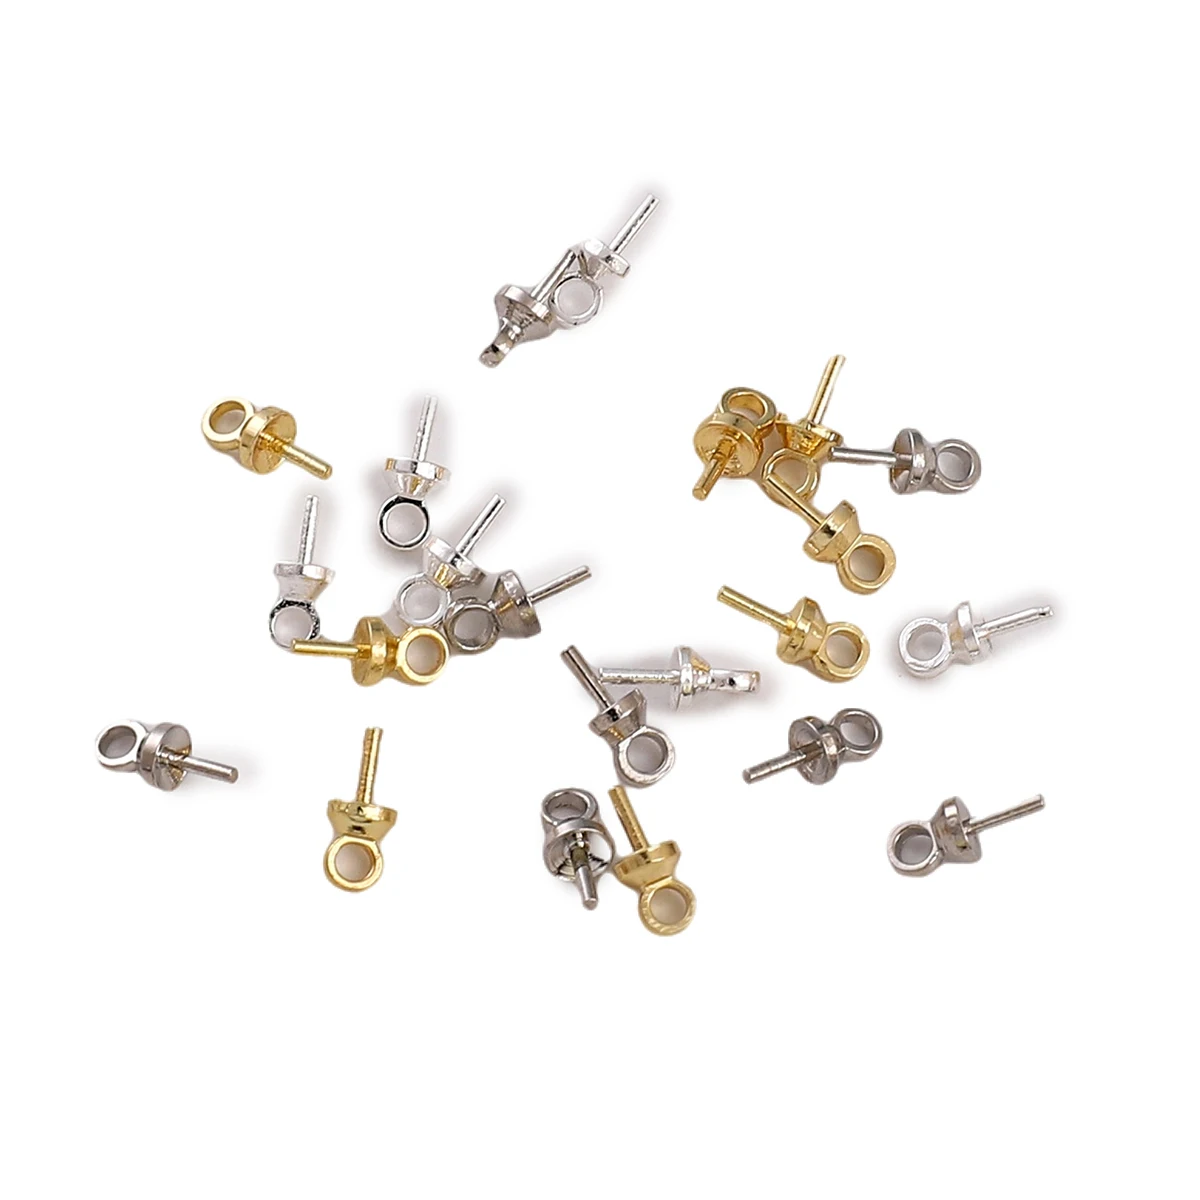 

10pcs 3x7mm Copper Charms Screw Eye Bails Beads End Caps Clasps Pins Connectors For DIY Pendant Jewelry Making Accessories